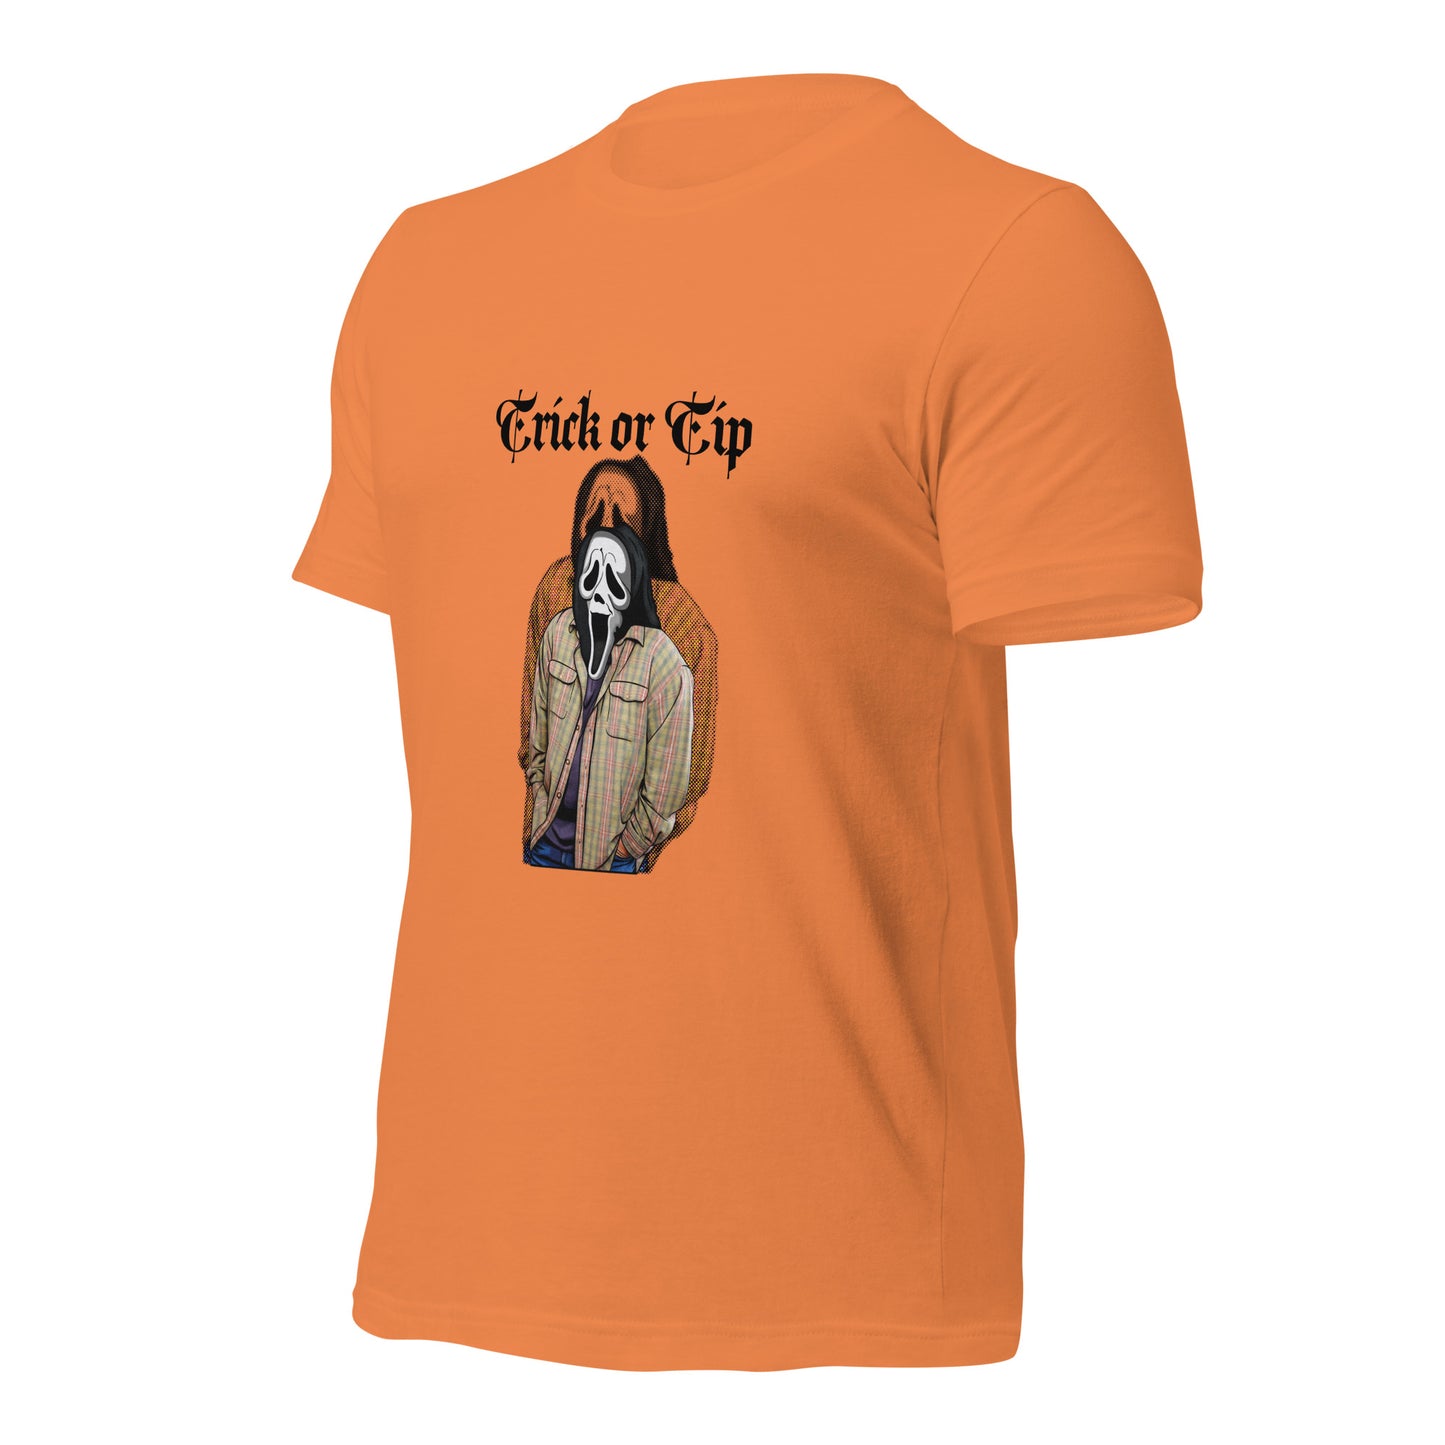 Trick Or Tip (Unisex t-shirt)